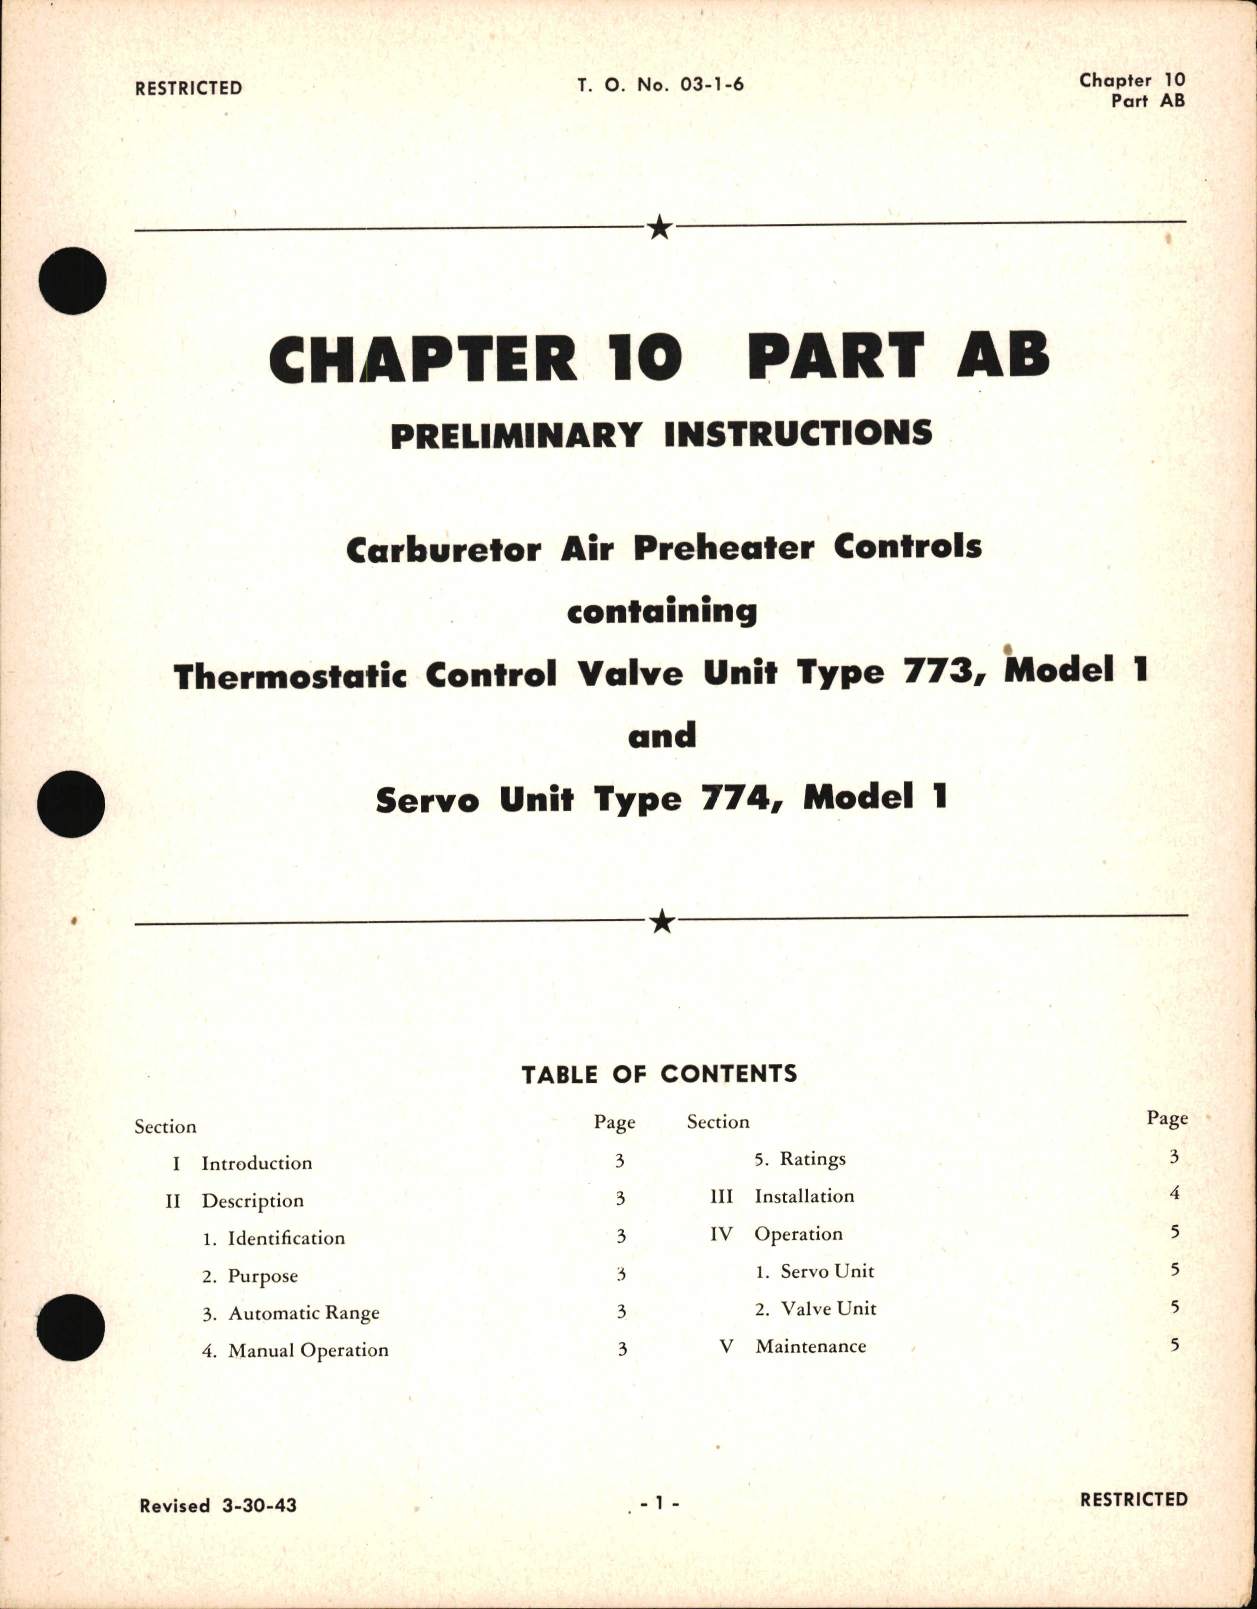 Sample page 1 from AirCorps Library document: Preliminary Instructions for Carburetor Air Preheater Controls Containing Thermostatic Control Valves & Servo Units